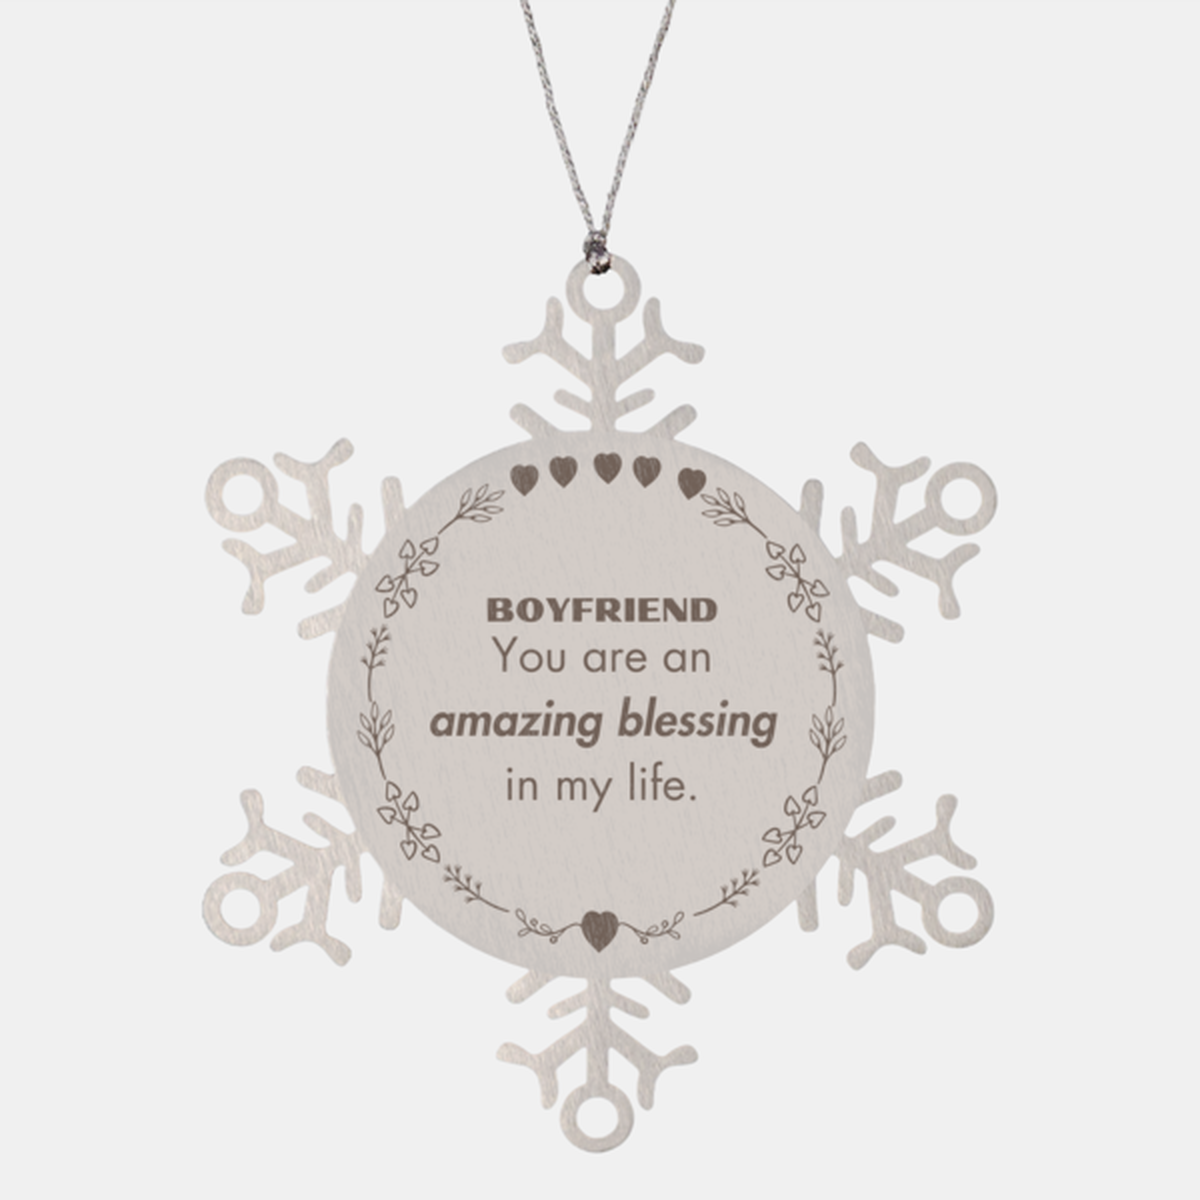 Boyfriend Snowflake Ornament, You are an amazing blessing in my life, Thank You Gifts For Boyfriend, Inspirational Birthday Christmas Unique Gifts For Boyfriend